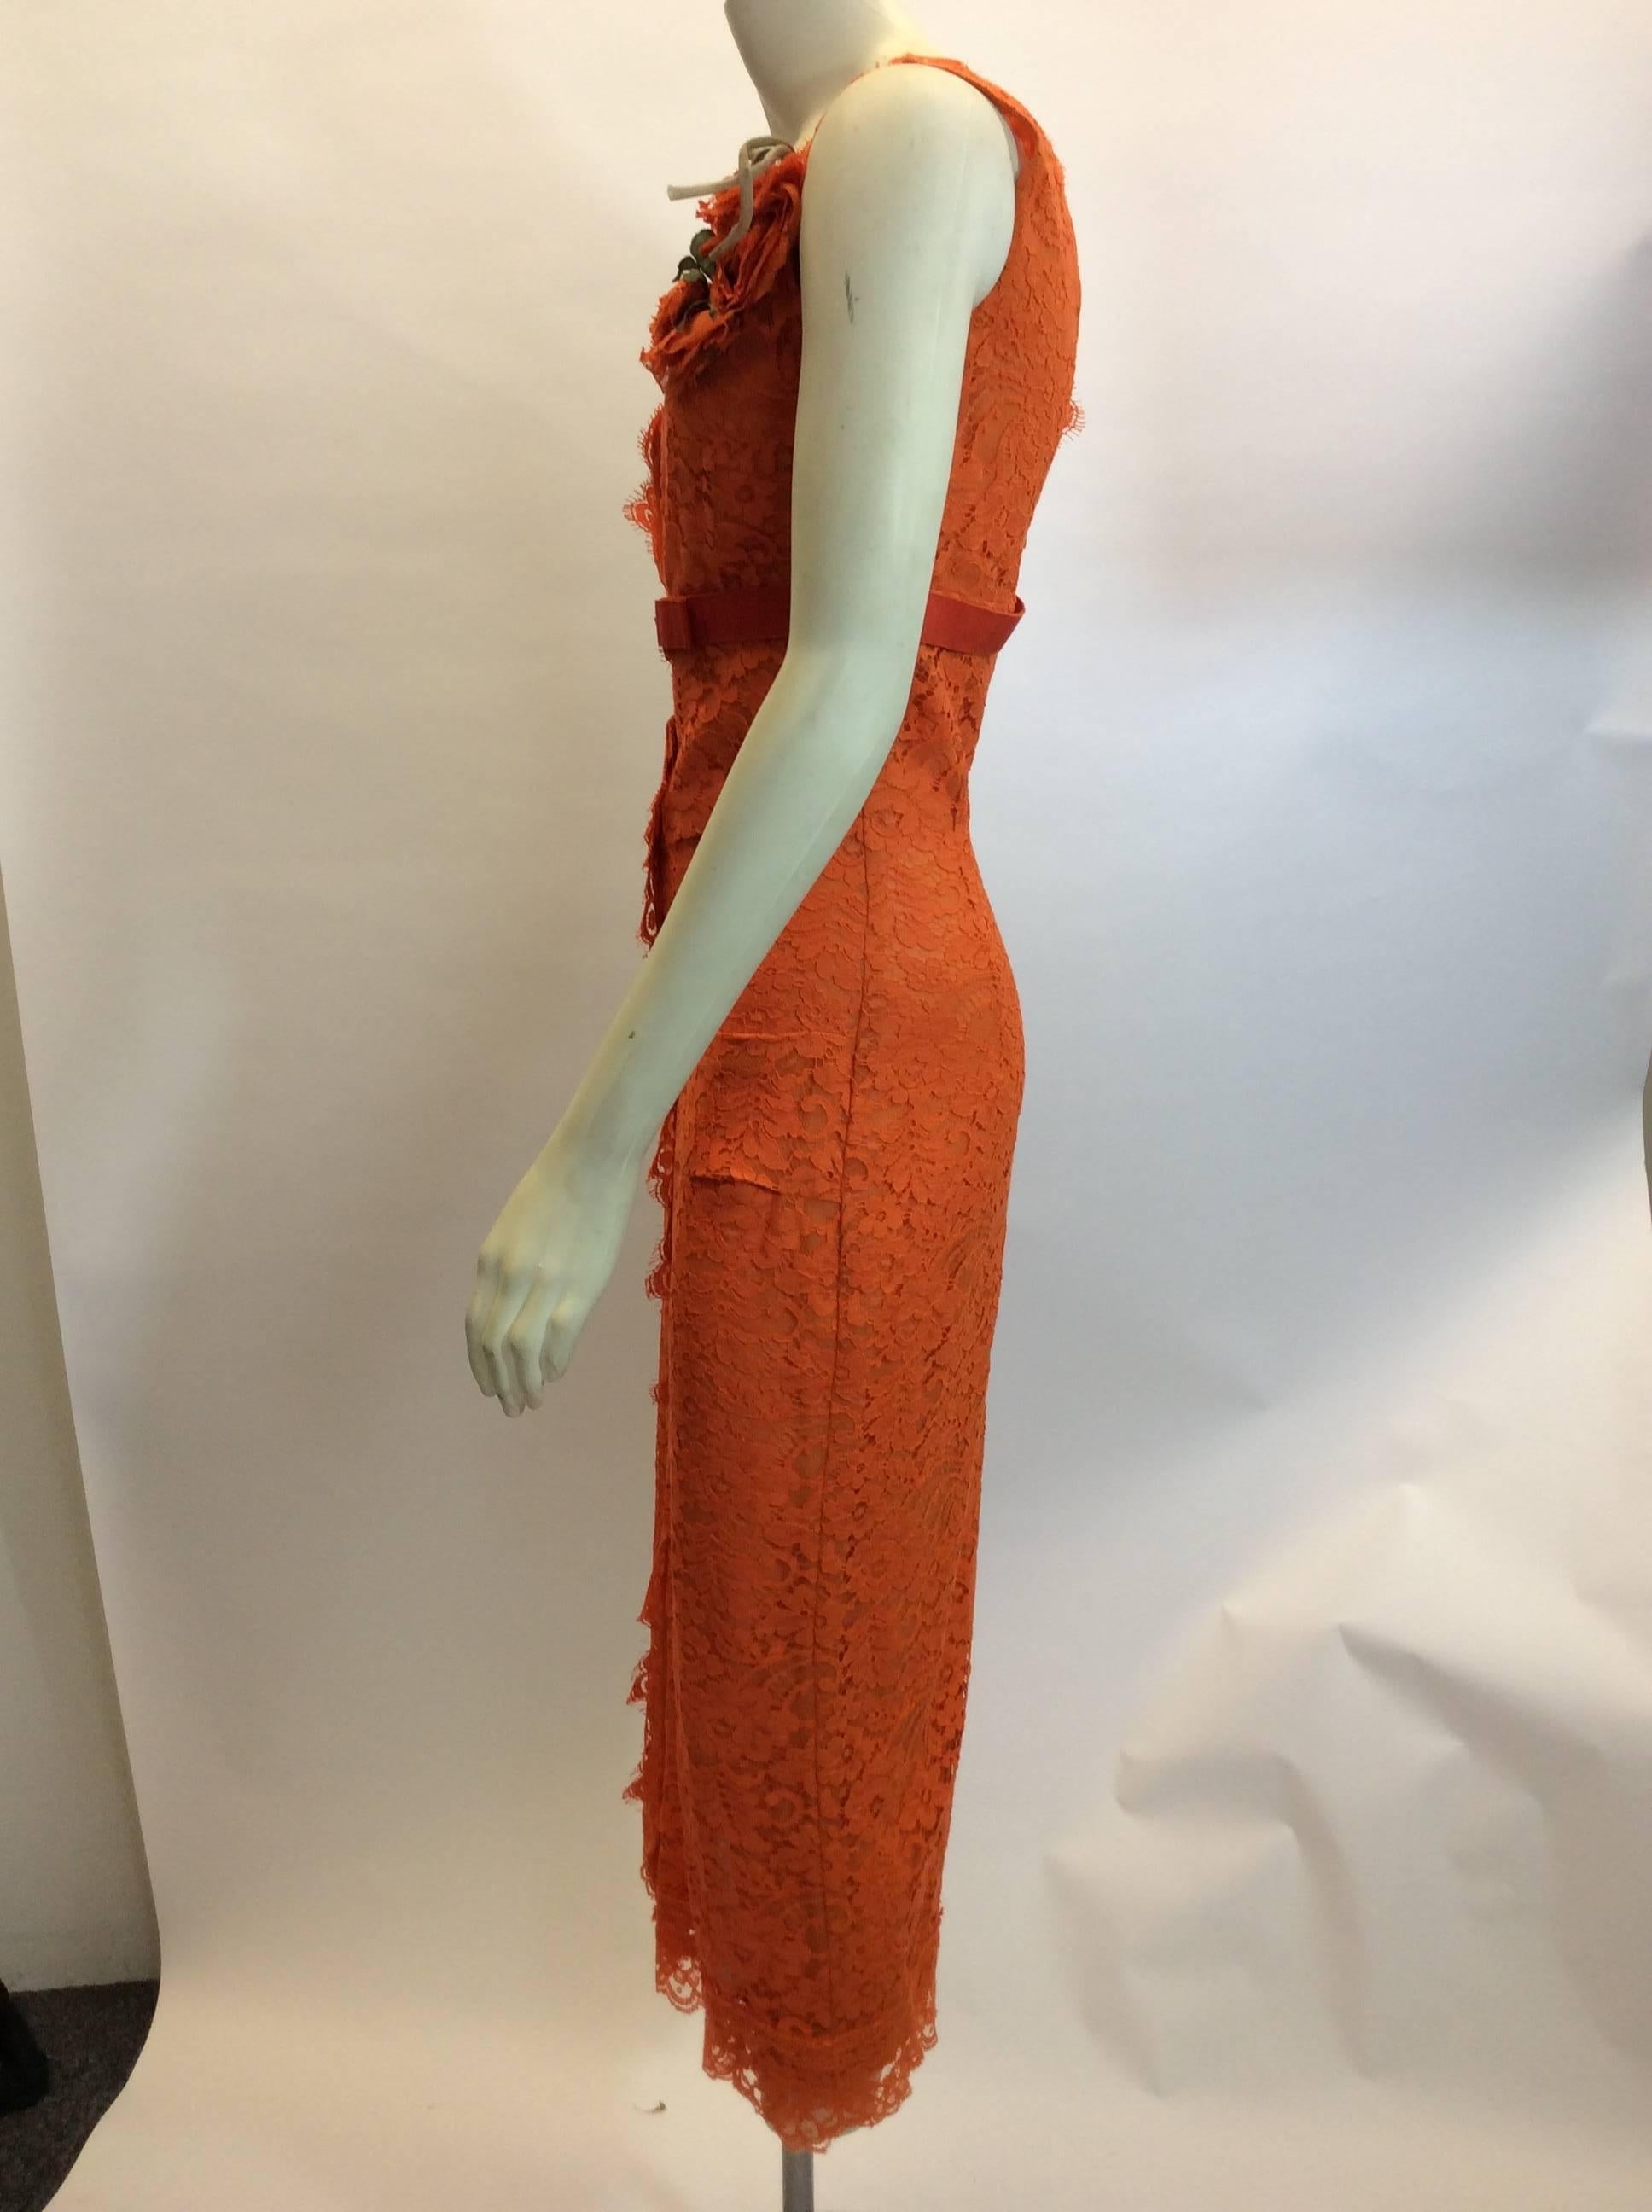 Dolce & Gabanna Lace Orange V Neck Dress 
Rouched down the center of the dress
Flower detail on chest
V neck and V in the back
Fully lined
NWT - Original price $3510
